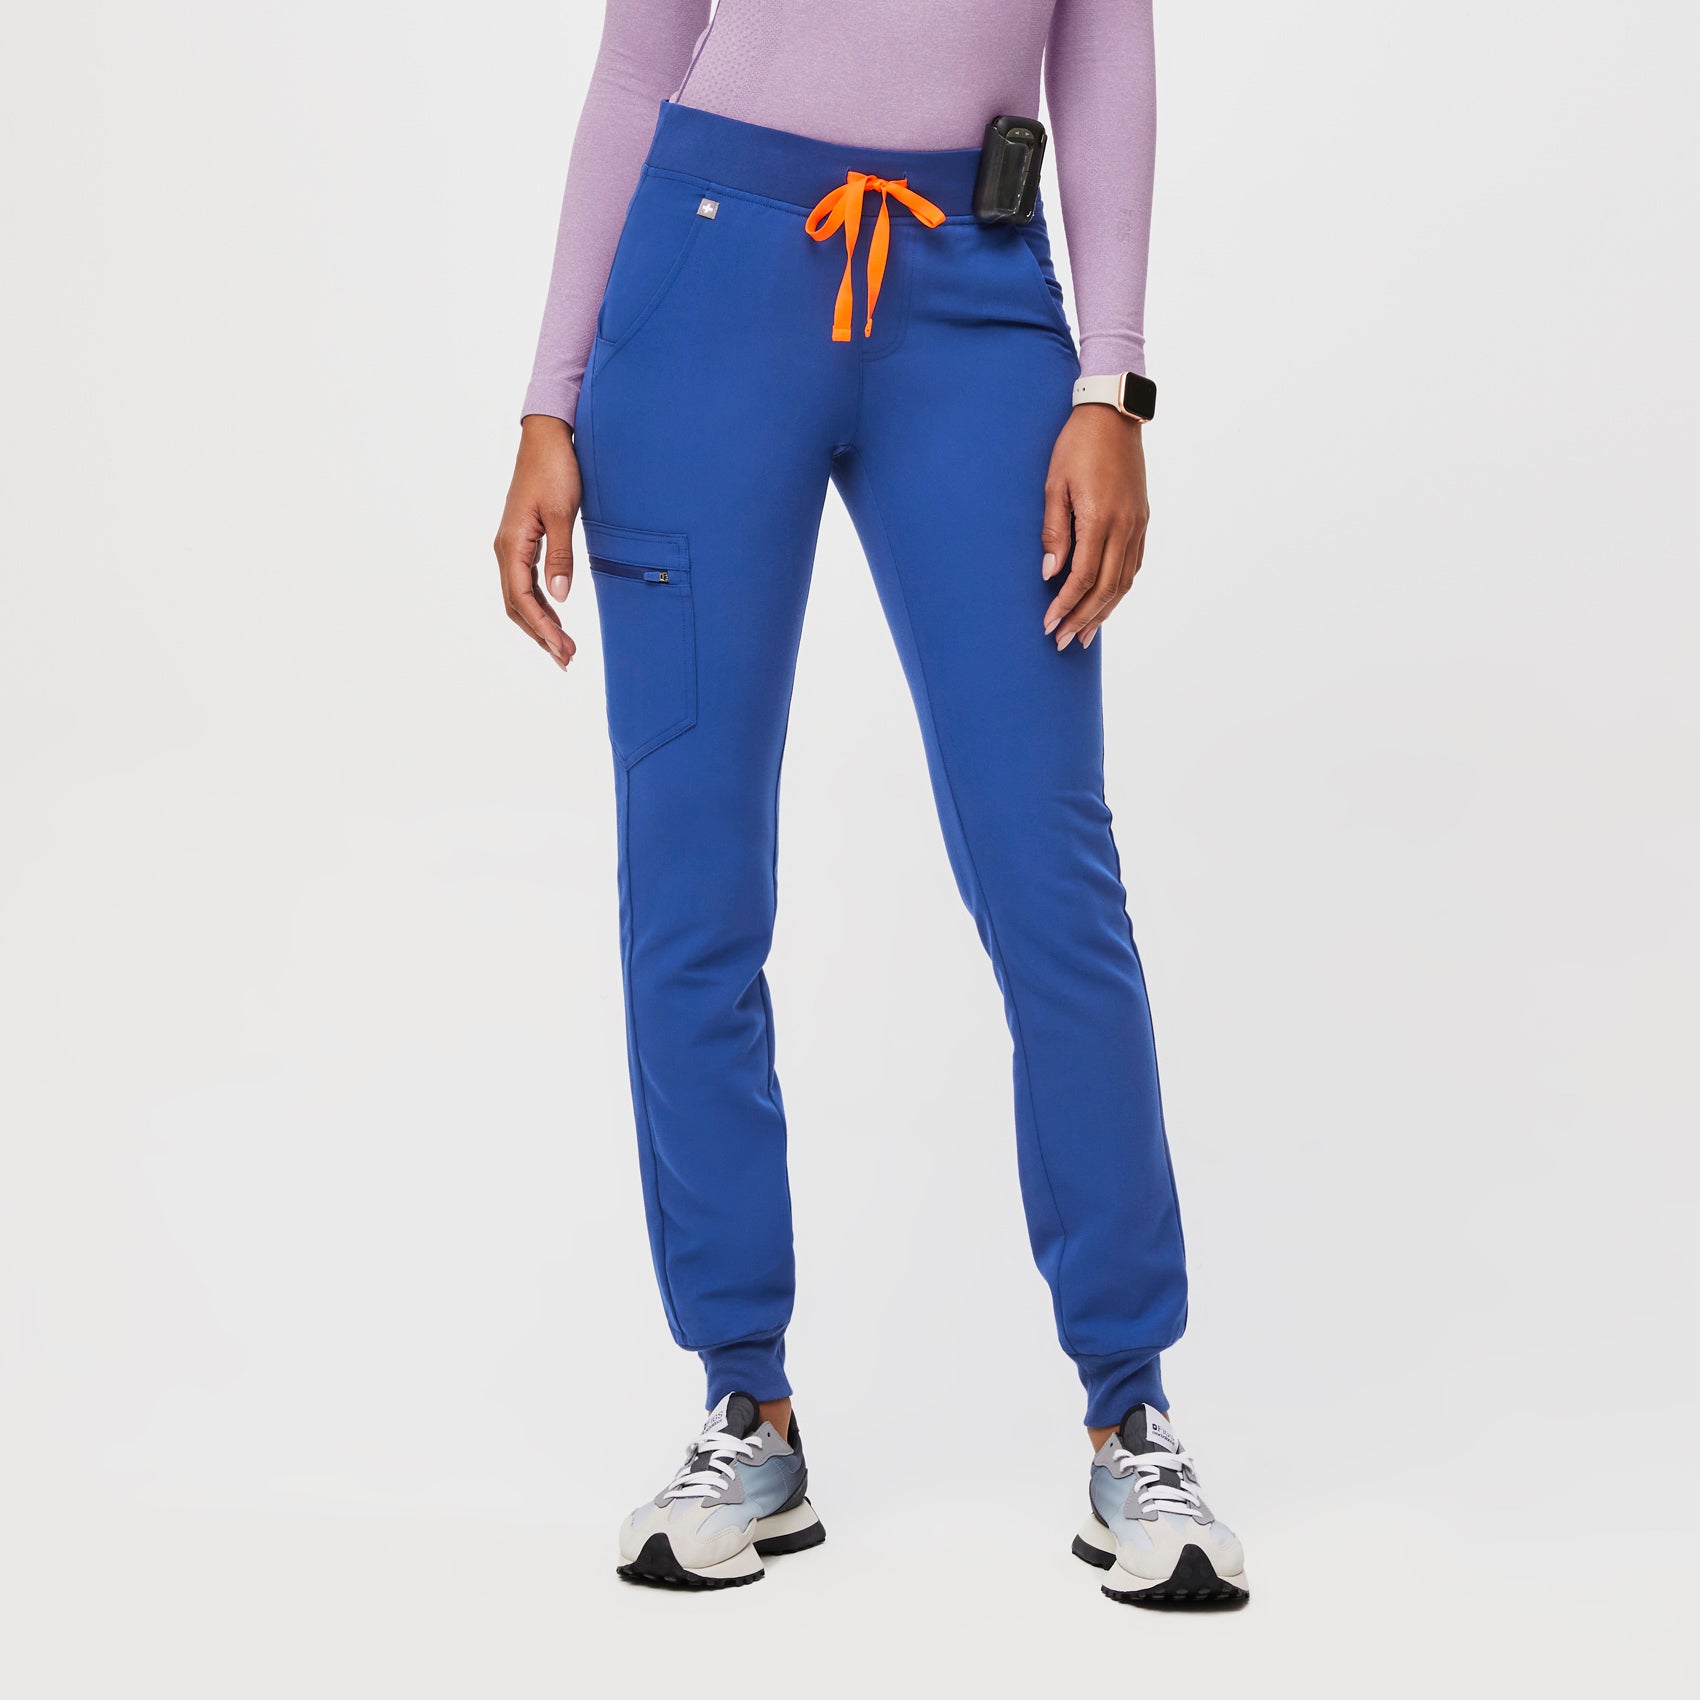 Figs Zamora Jogger Scrub Pants In Stock Availability and Price